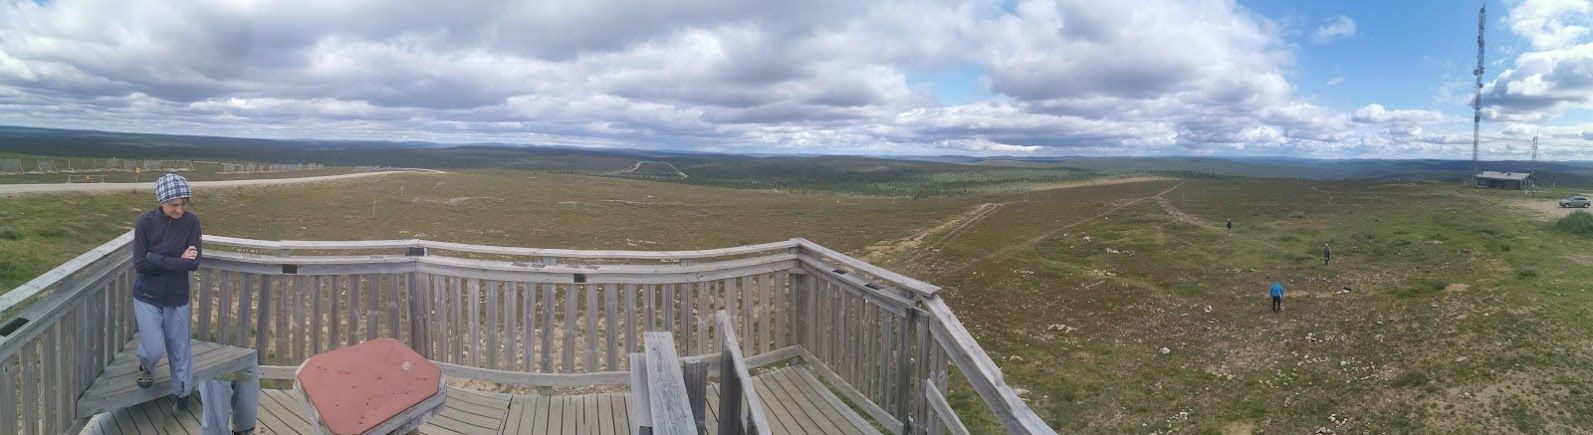 Viewing tower (worthwhile in Finland from an altitude of 438 meters above sea level)